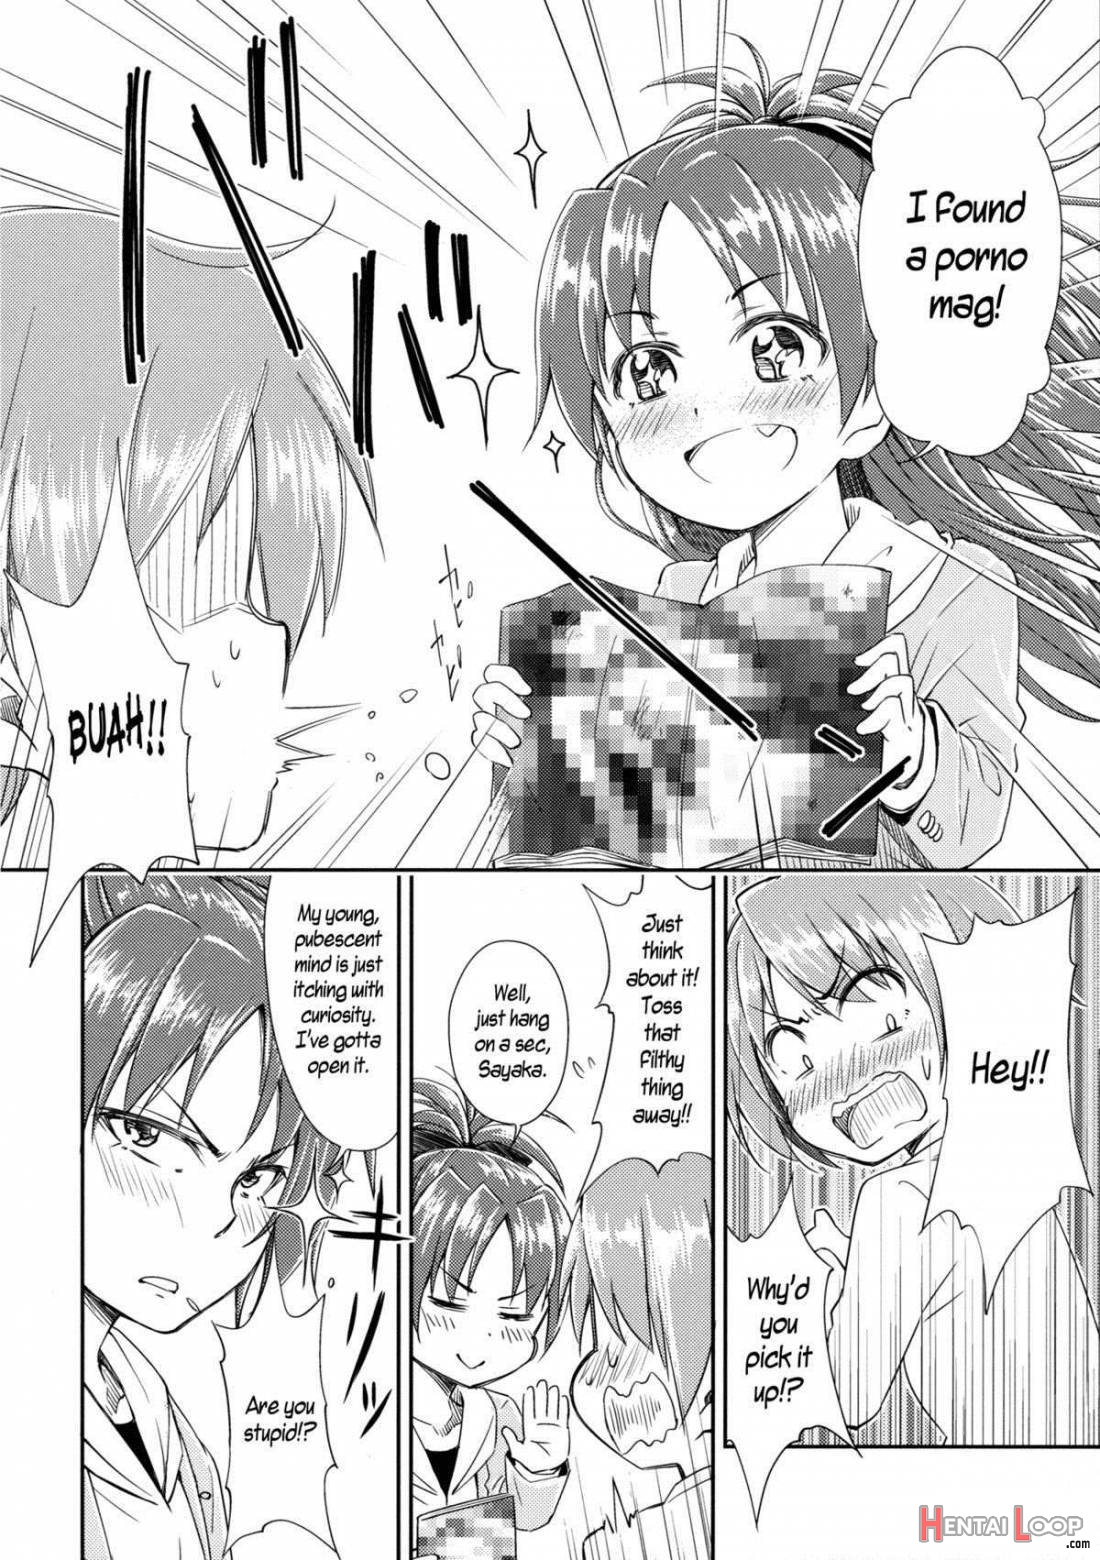 Lovely Girls’ Lily Vol.9 page 4